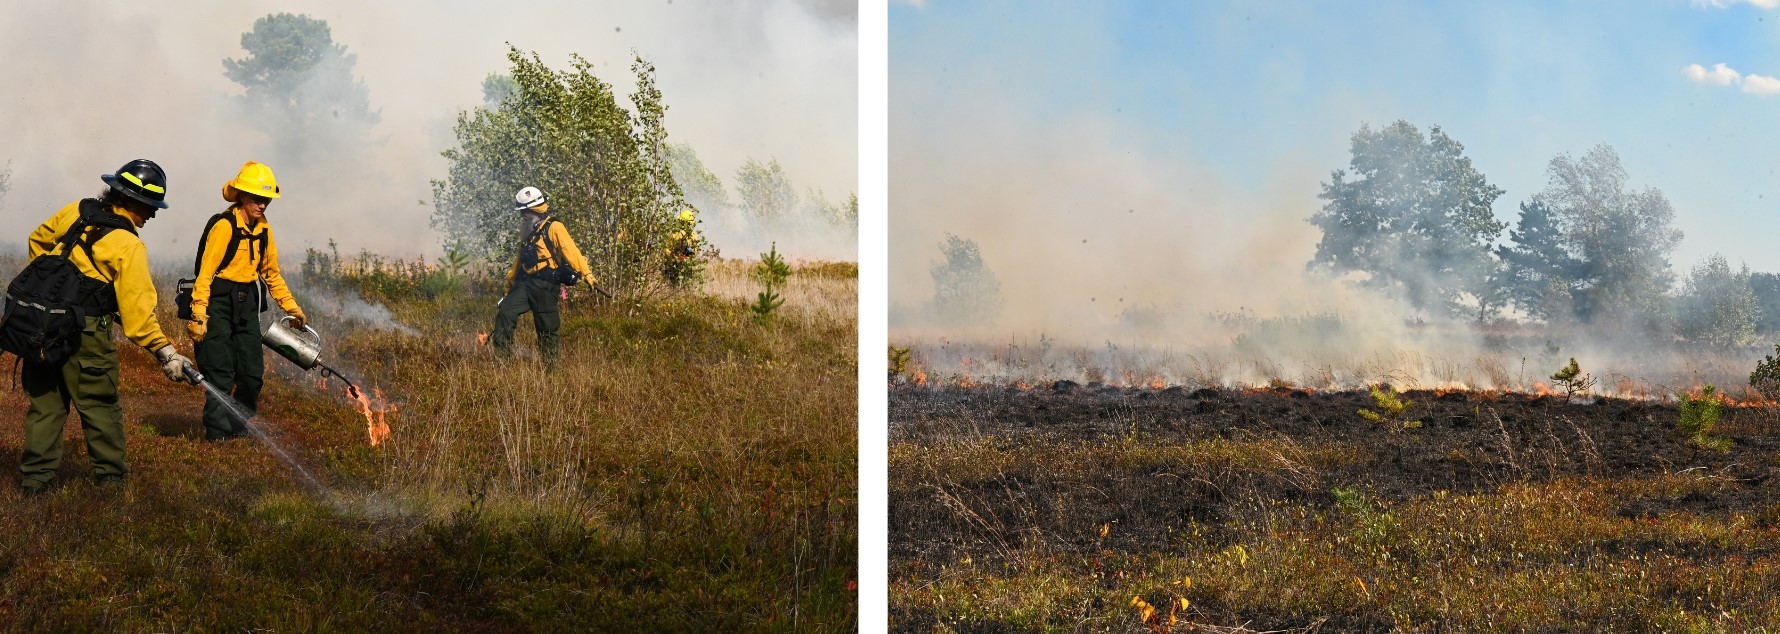 Several people in protective yellow clothing and hard hats working a prescribed burn in a grassland.